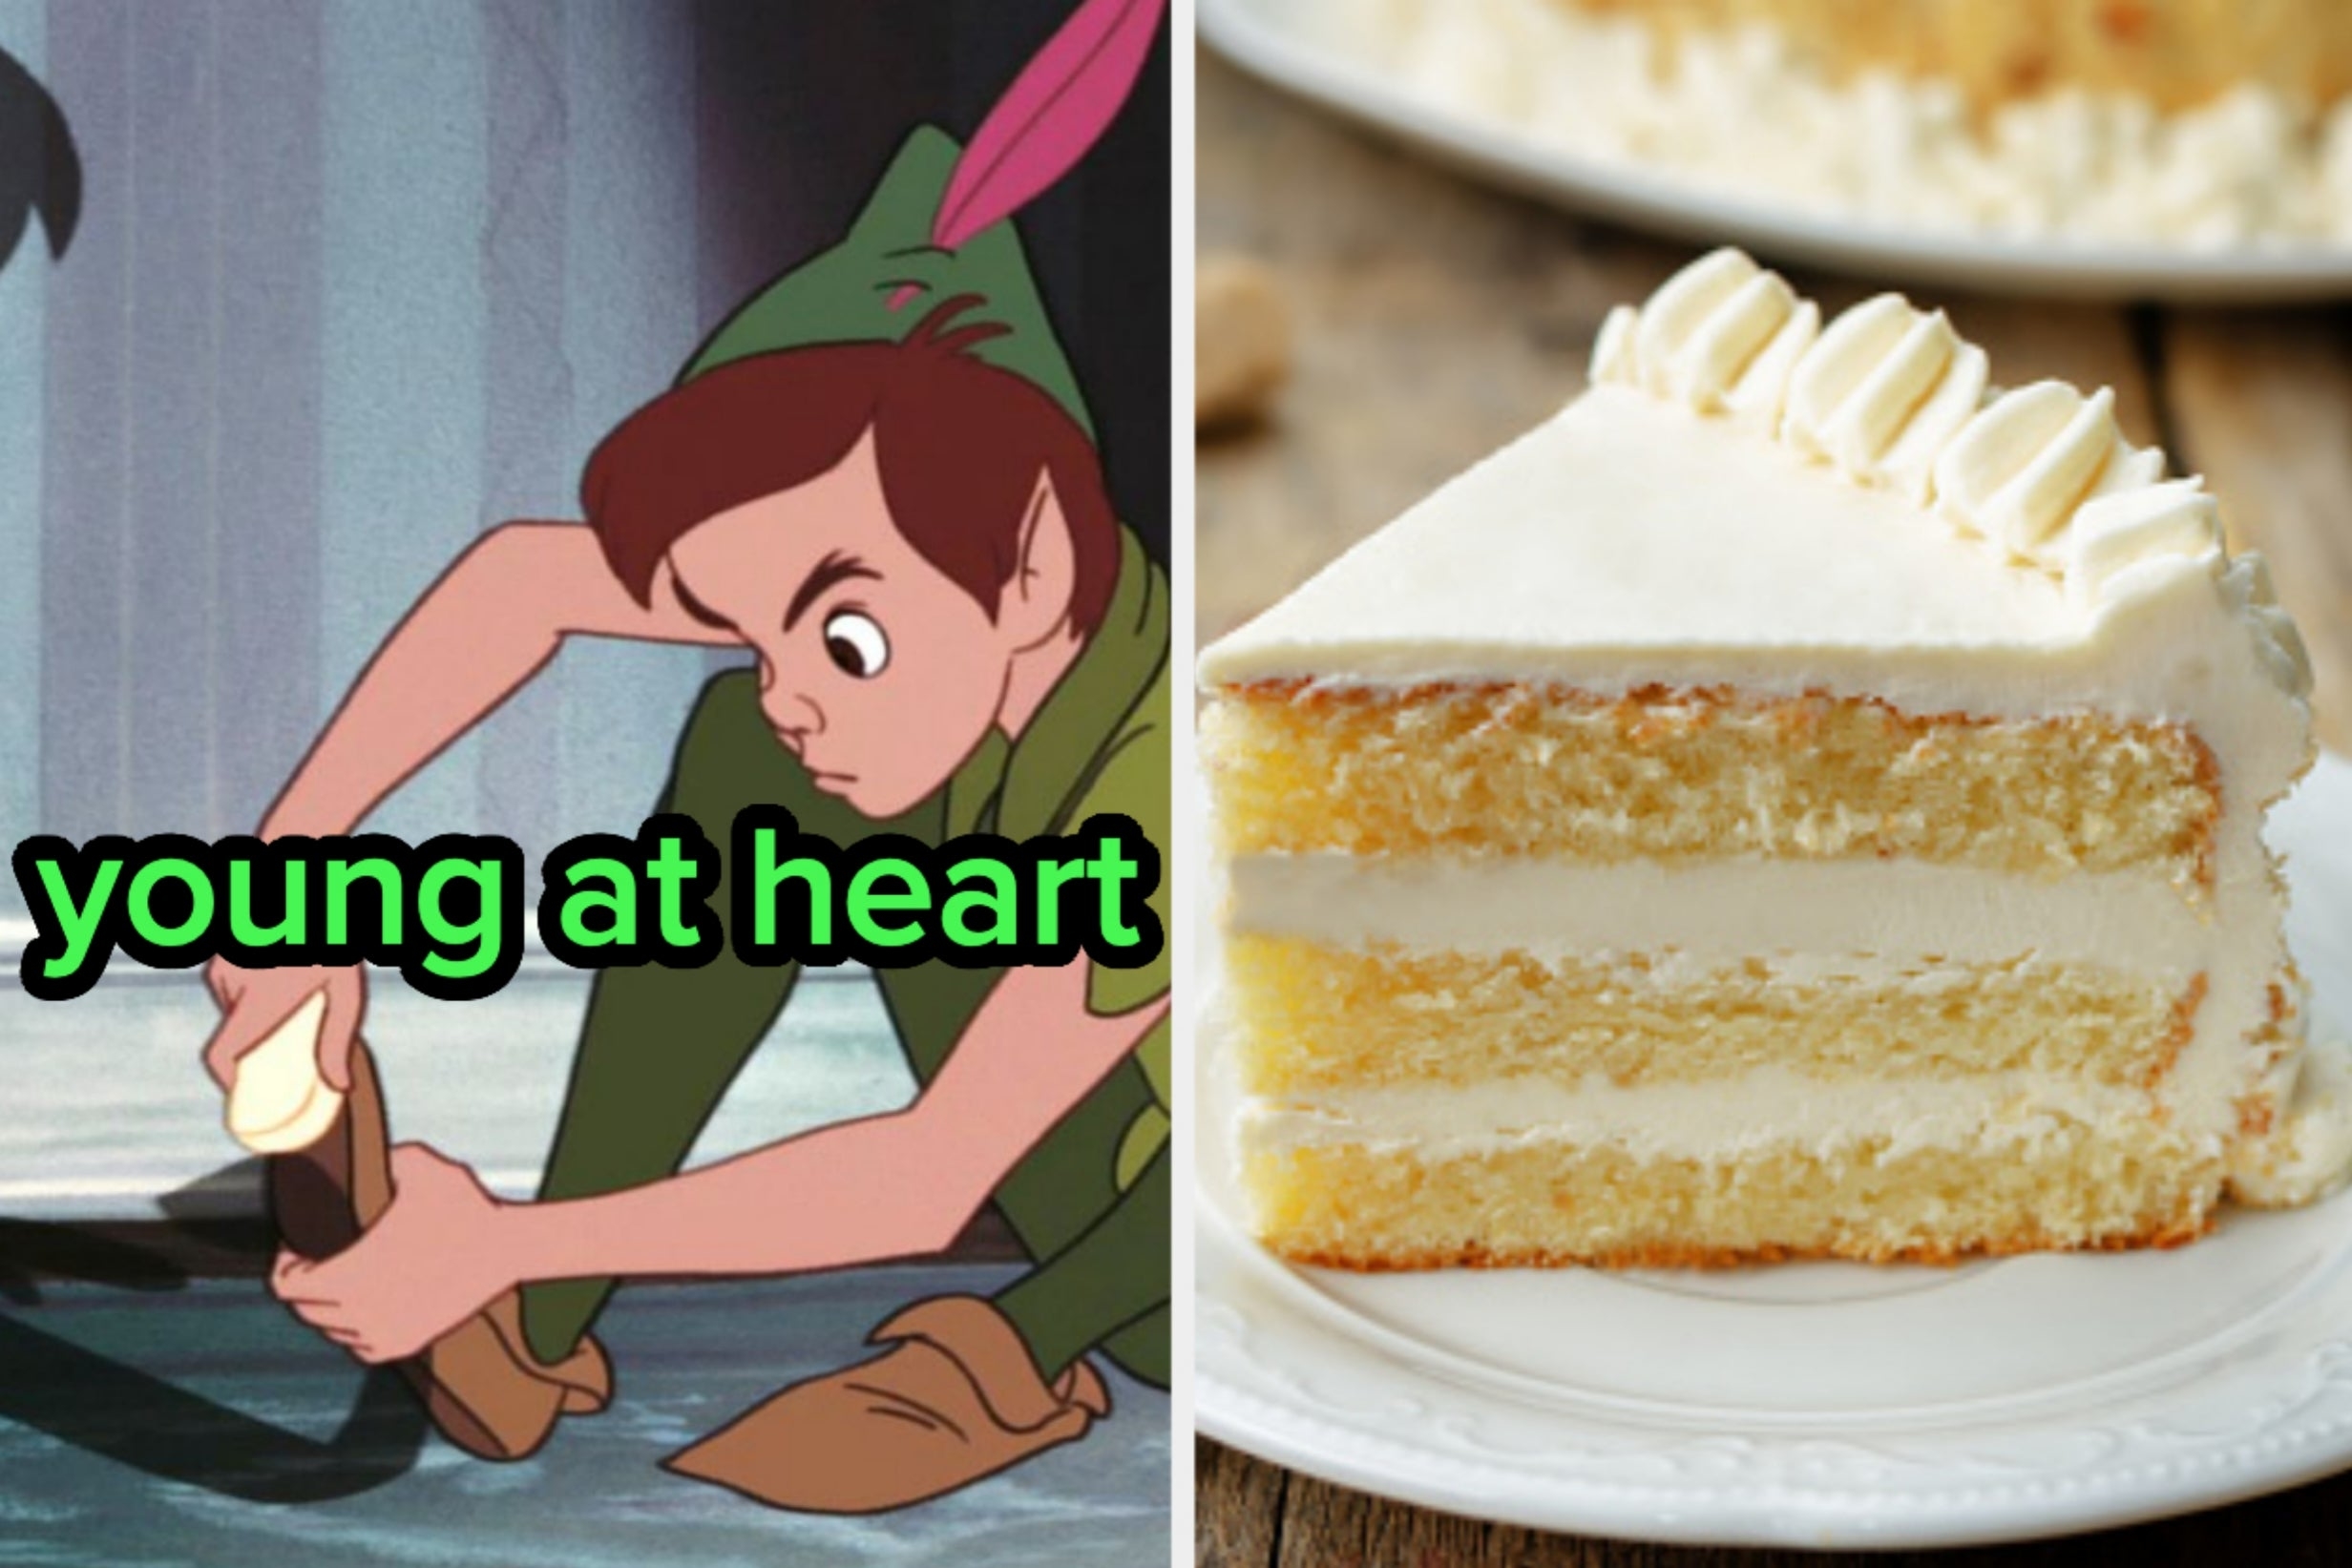 On the left, Peter Pan labeled young at heart, and on the right, a slice of vanilla cake